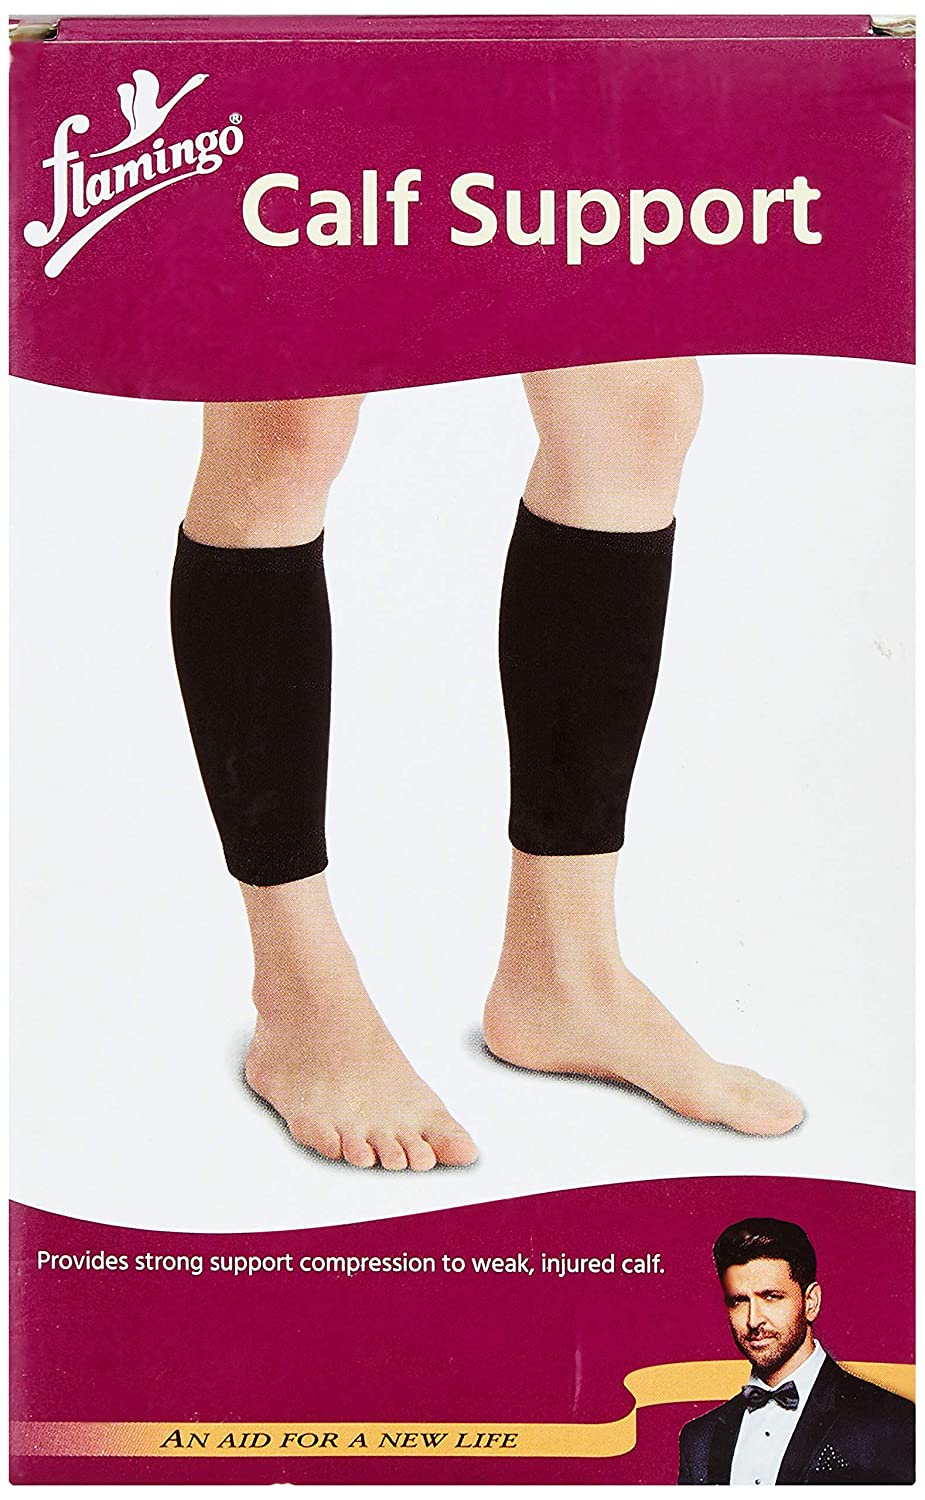 Flamingo Calf Support for Women and Men, Splint Support for Working